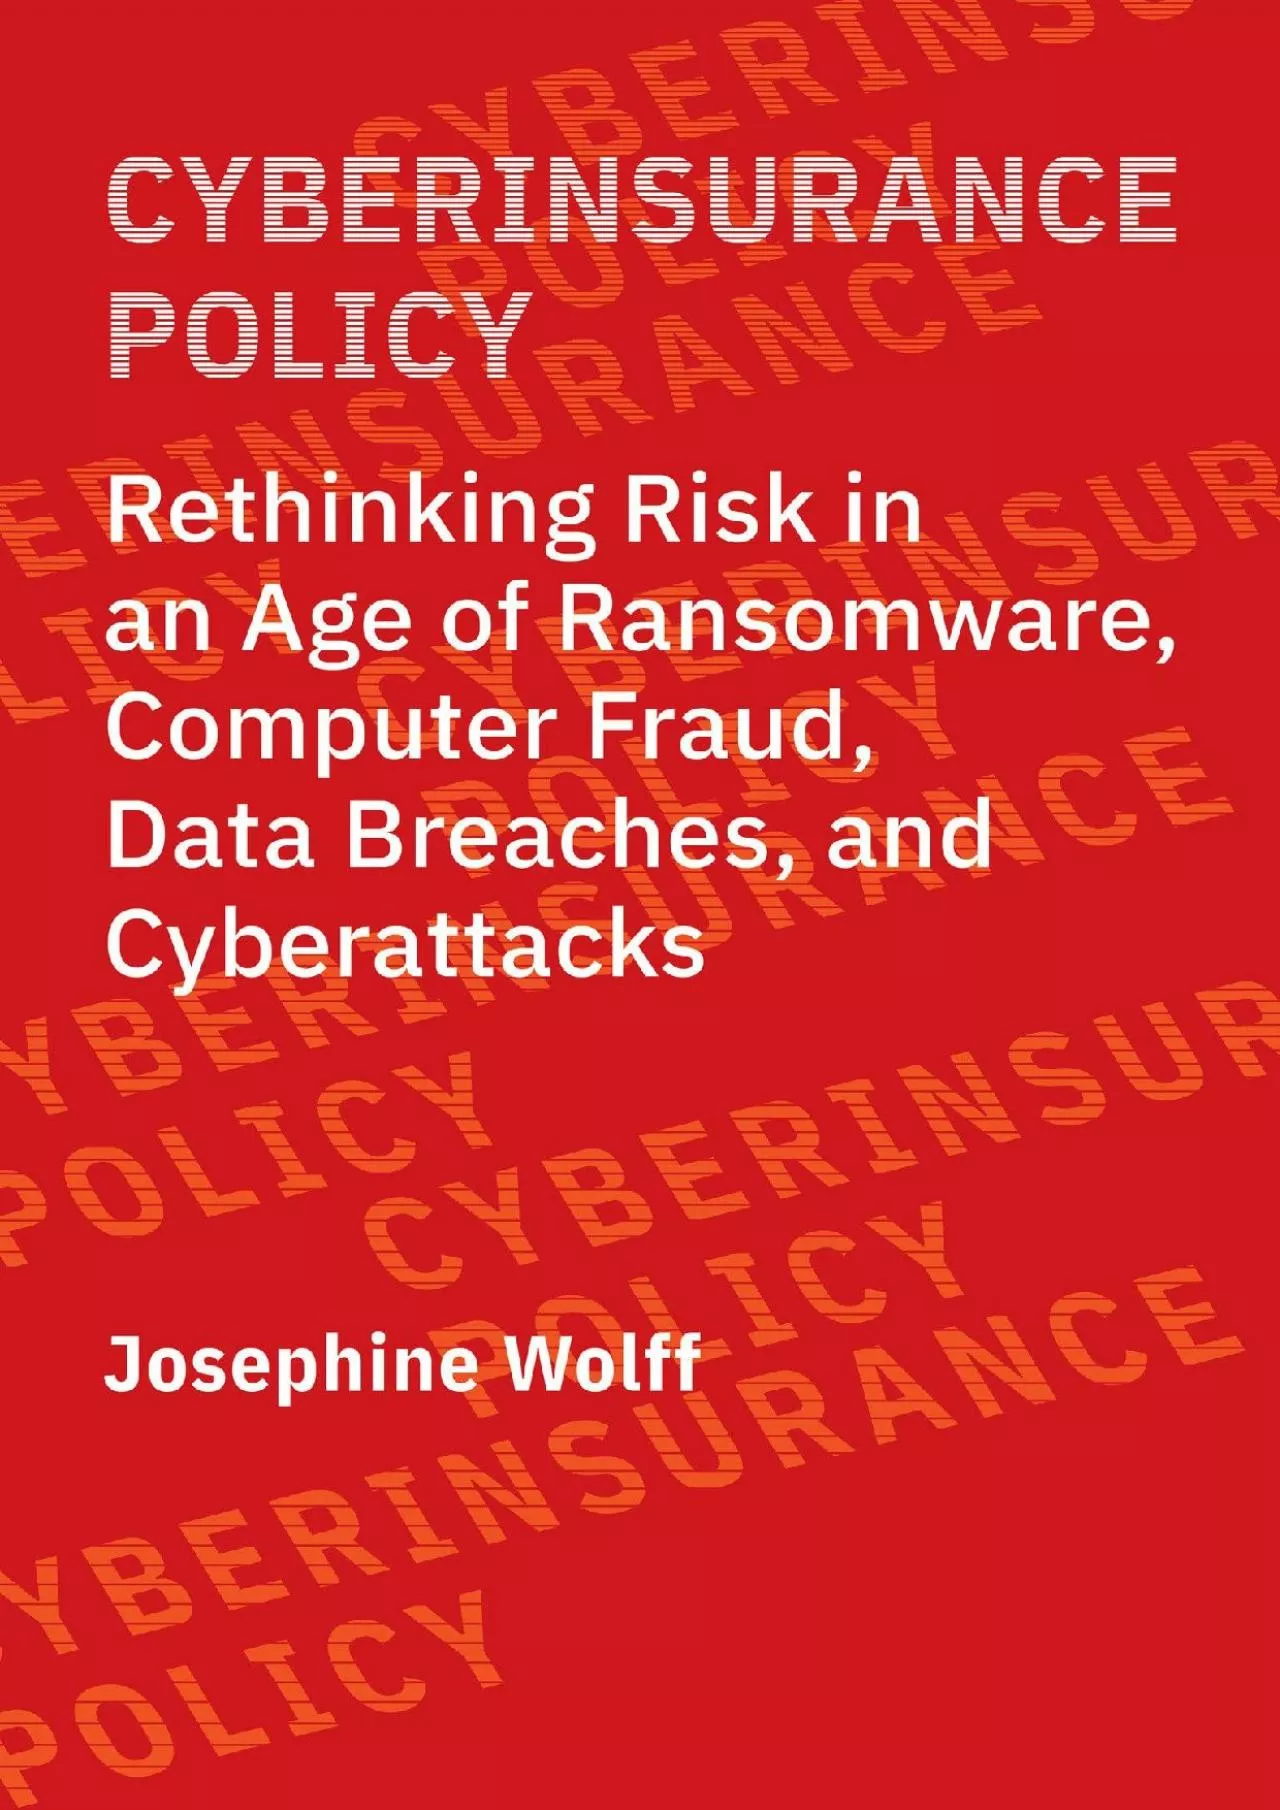 (BOOK)-Cyberinsurance Policy: Rethinking Risk in an Age of Ransomware, Computer Fraud,